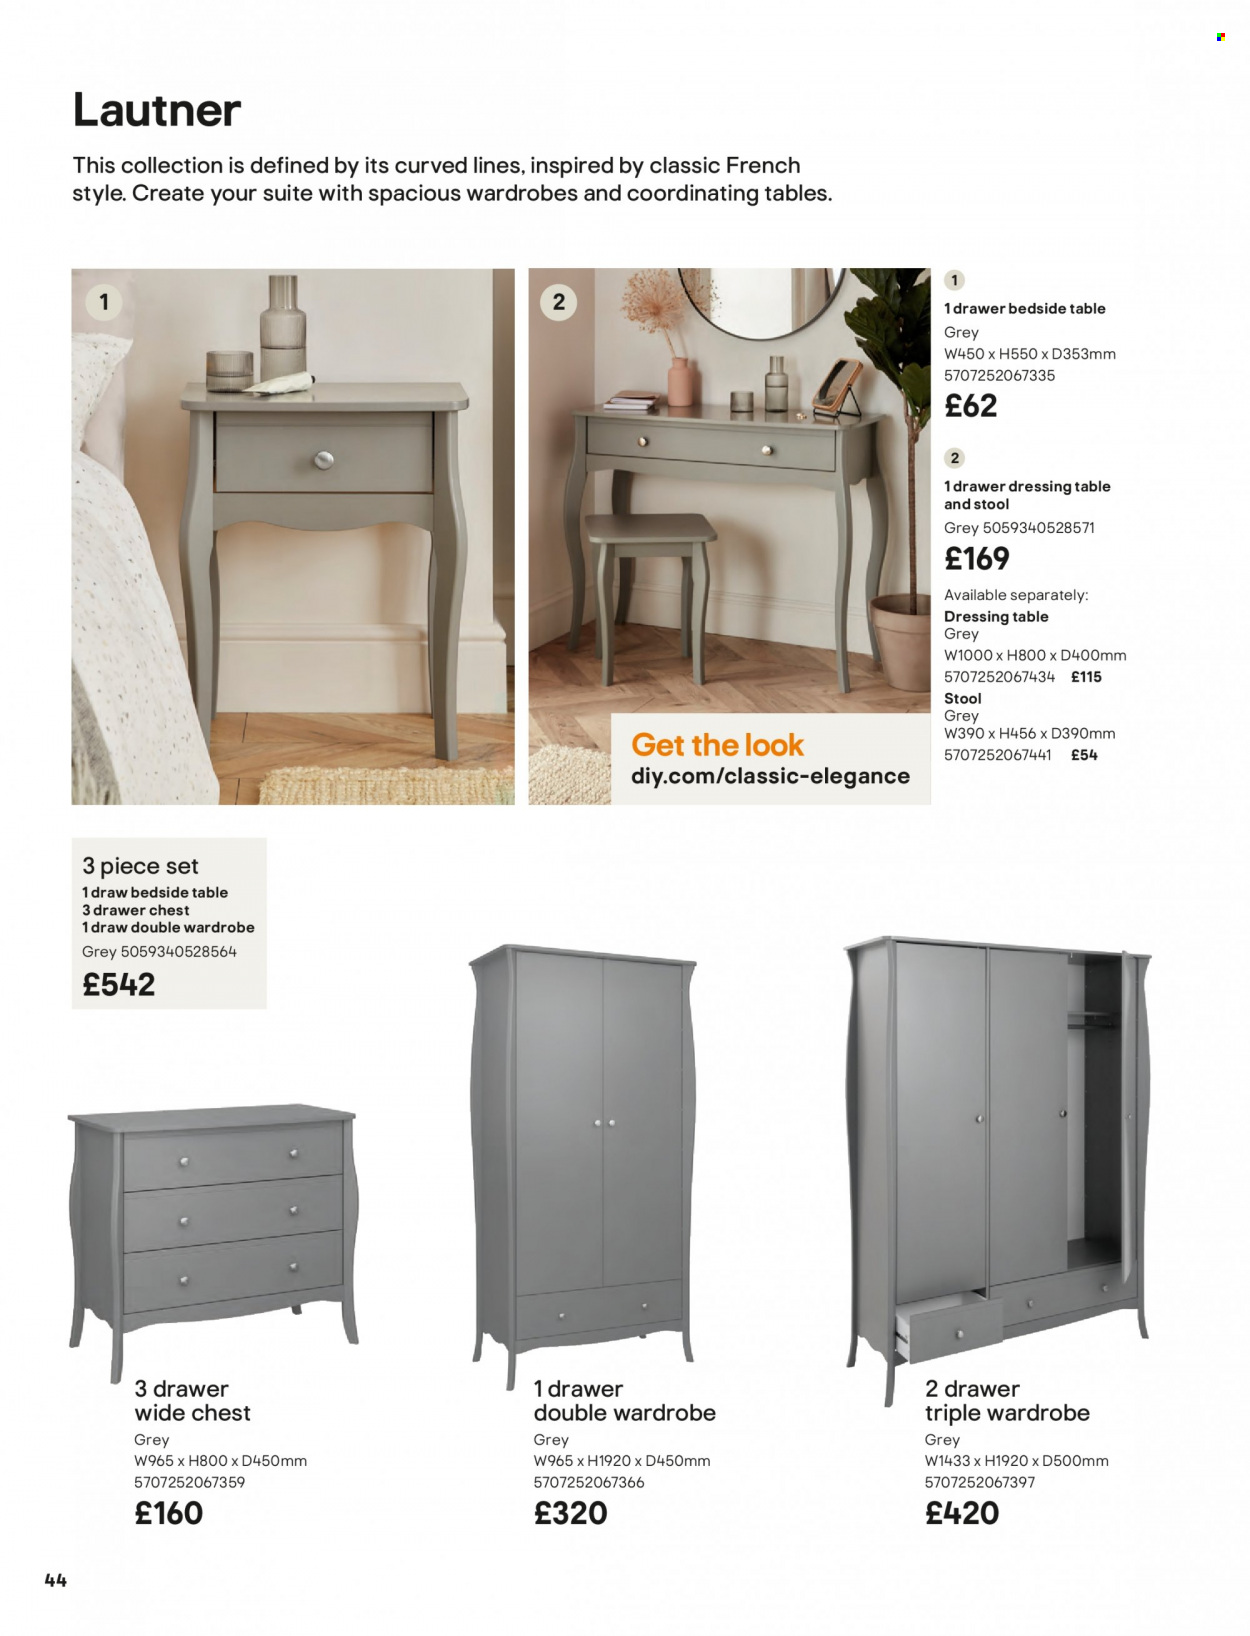 thumbnail - B&Q offer  - Sales products - table, stool, wardrobes, wardrobe, bedside table, dressing table. Page 44.